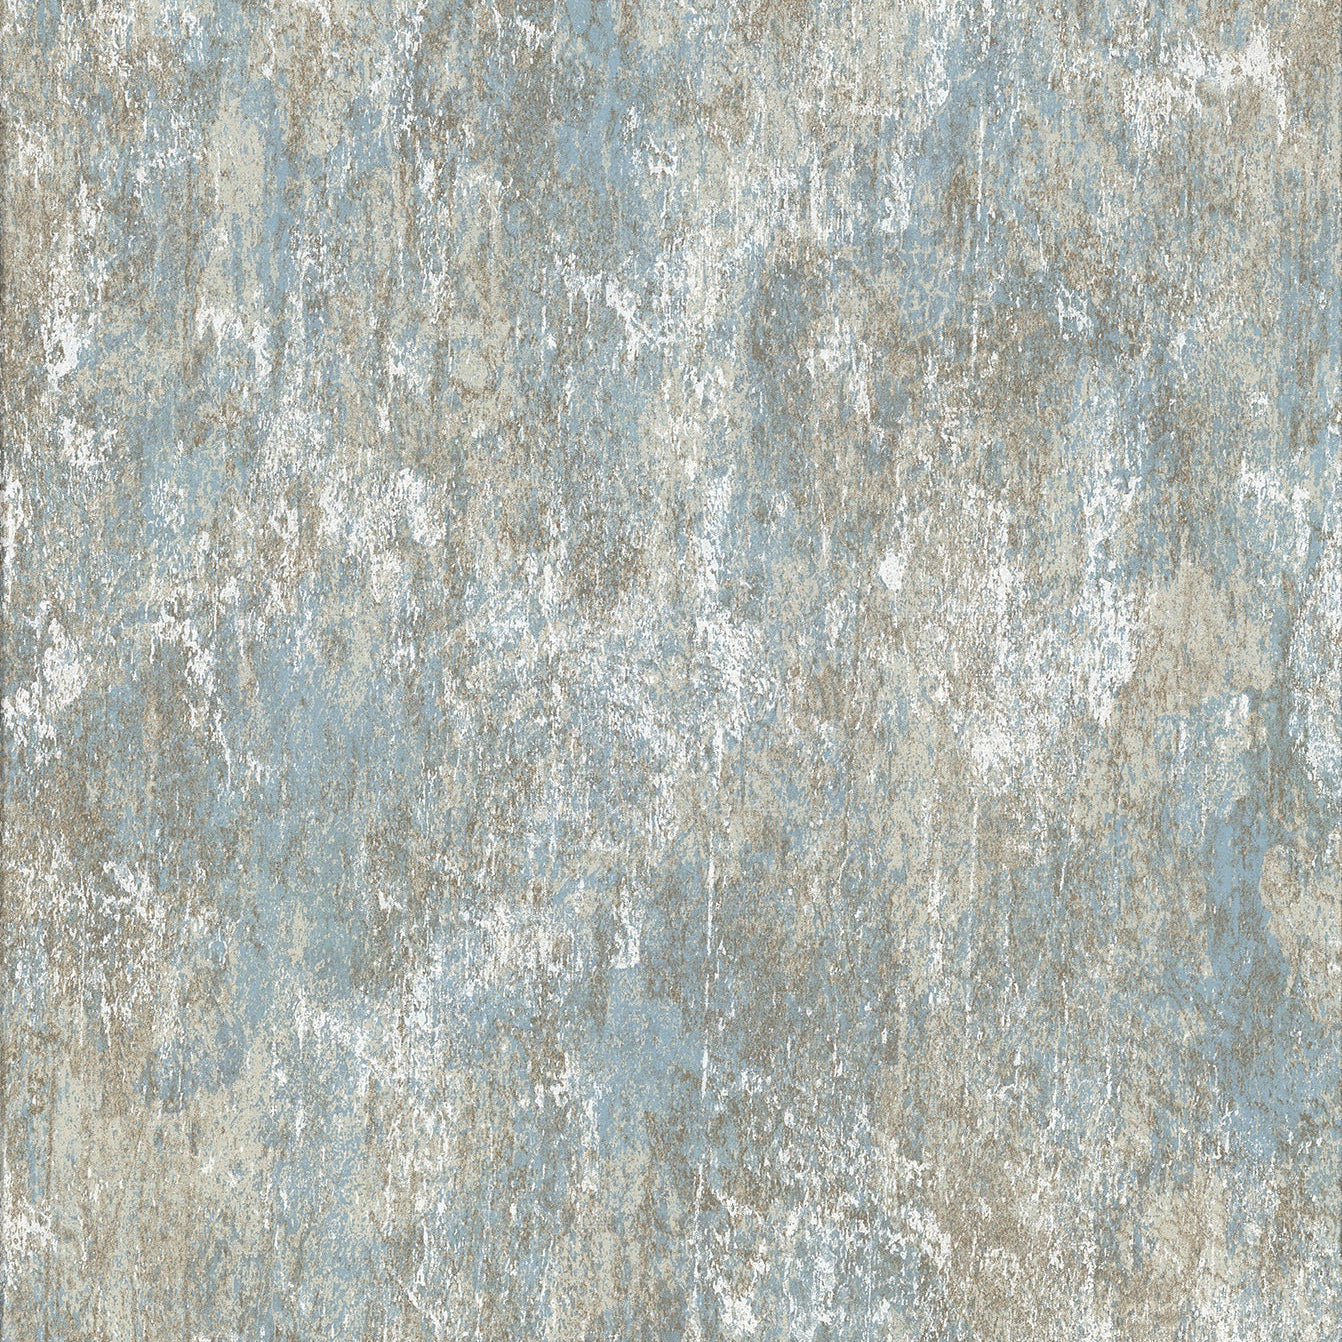 Acquire 2909-SH-12060 Riva Bovary Grey Distressed Texture Brewster Wallpaper